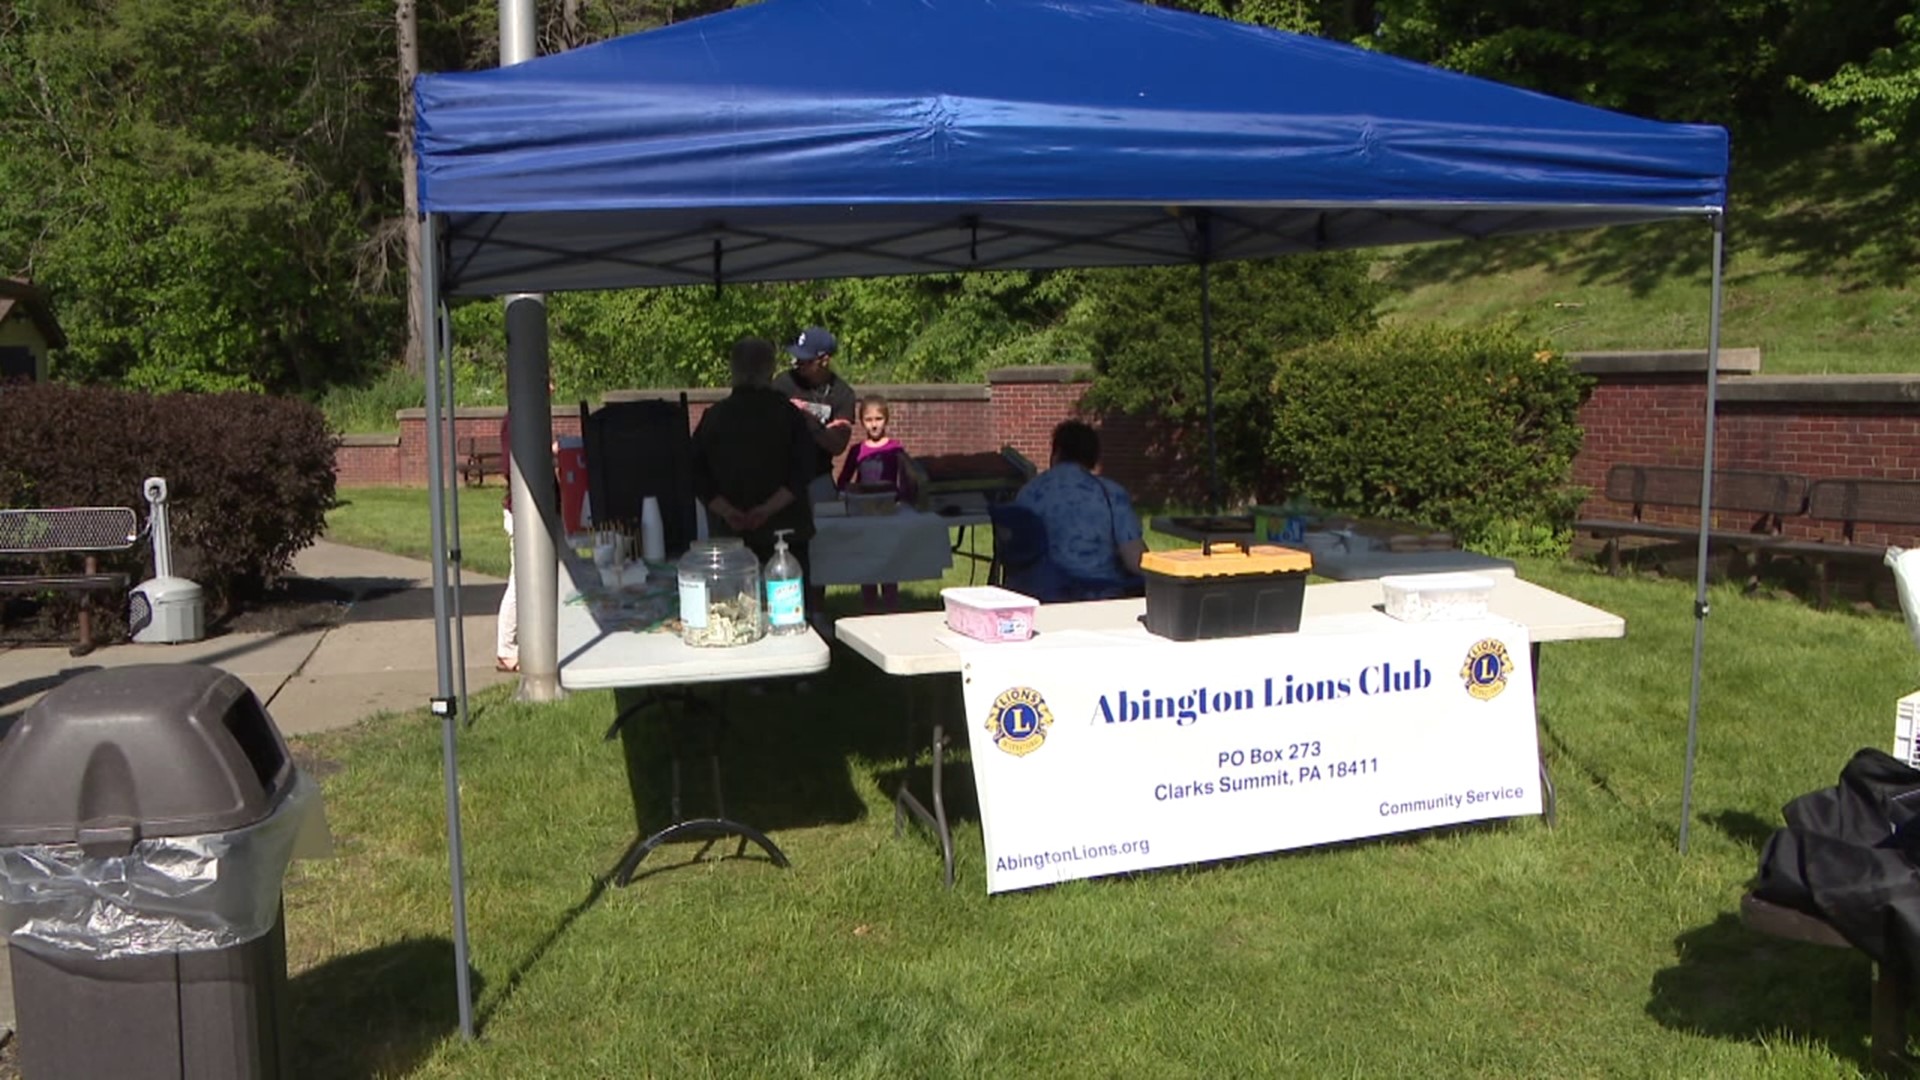 Newswatch 16 found the Abington Lions Club at a rest area along I-81 North in Susquehanna County.